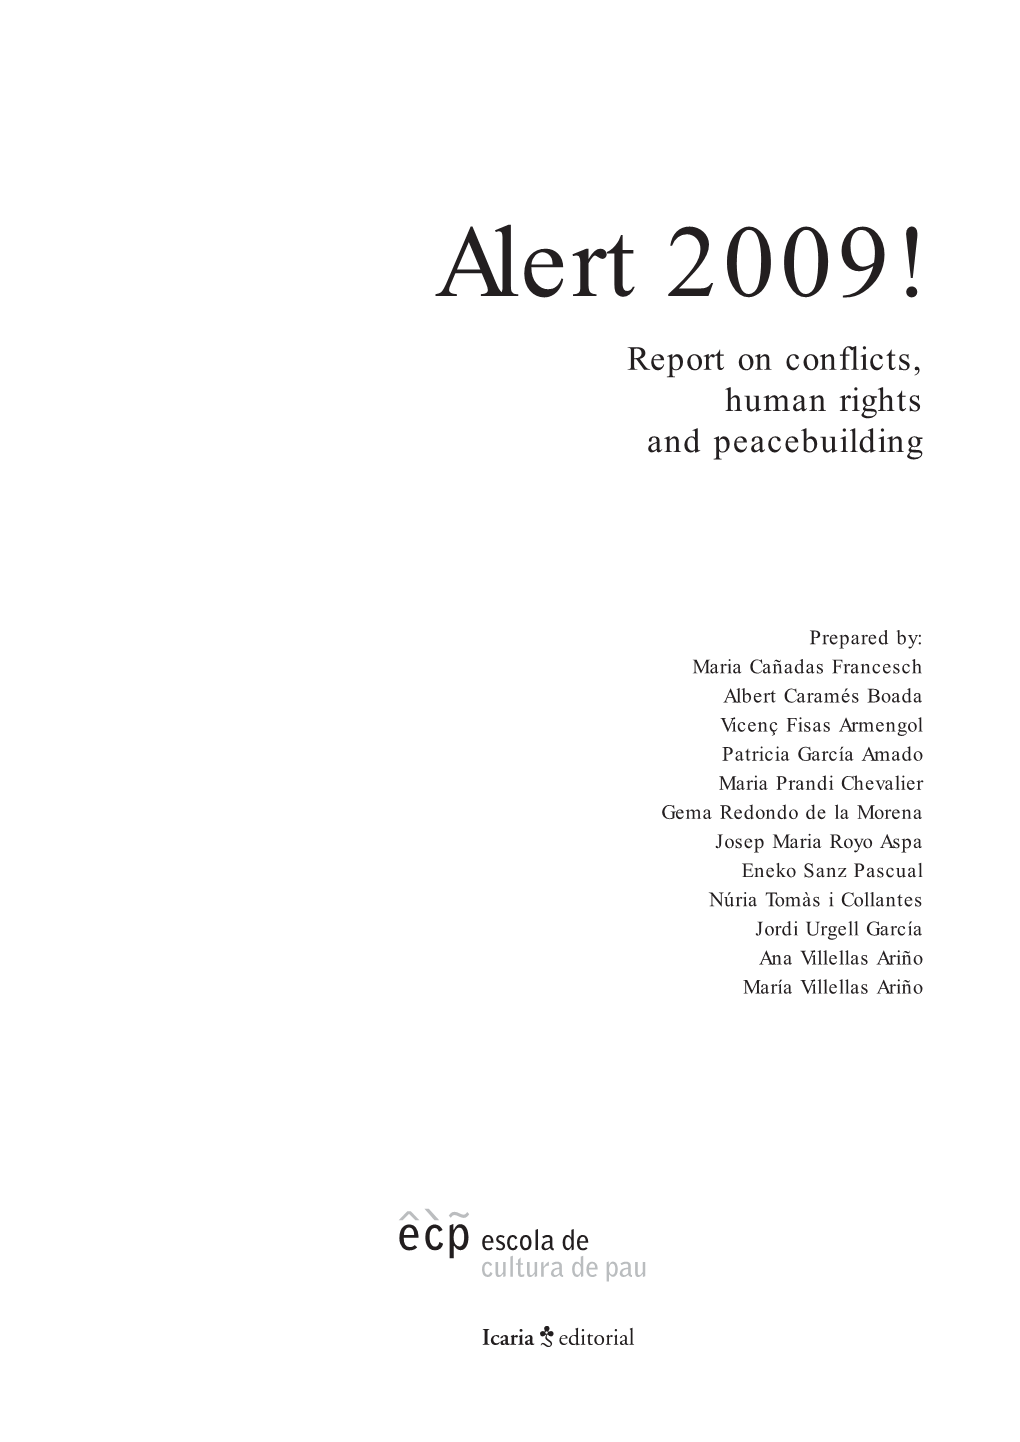 Alert 2009! Report on Conflicts, Human Rights and Peacebuilding